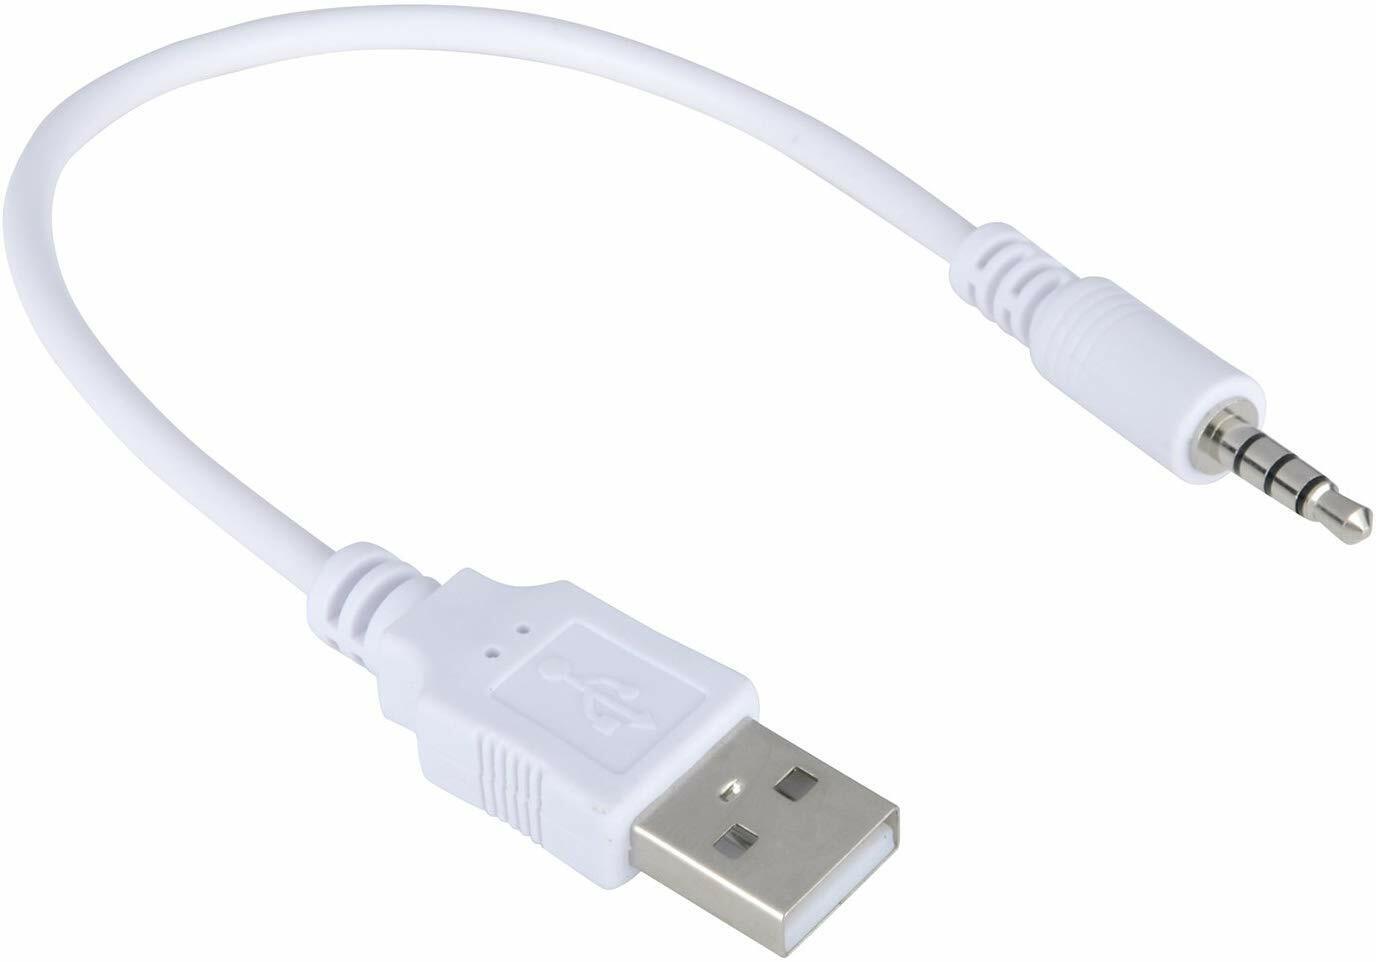 5 x New USB Cable Sync+Charger Cord For IPOD SHUFFLE 2ND GEN 2G Generation Only INSTEN Does not apply - фотография #2